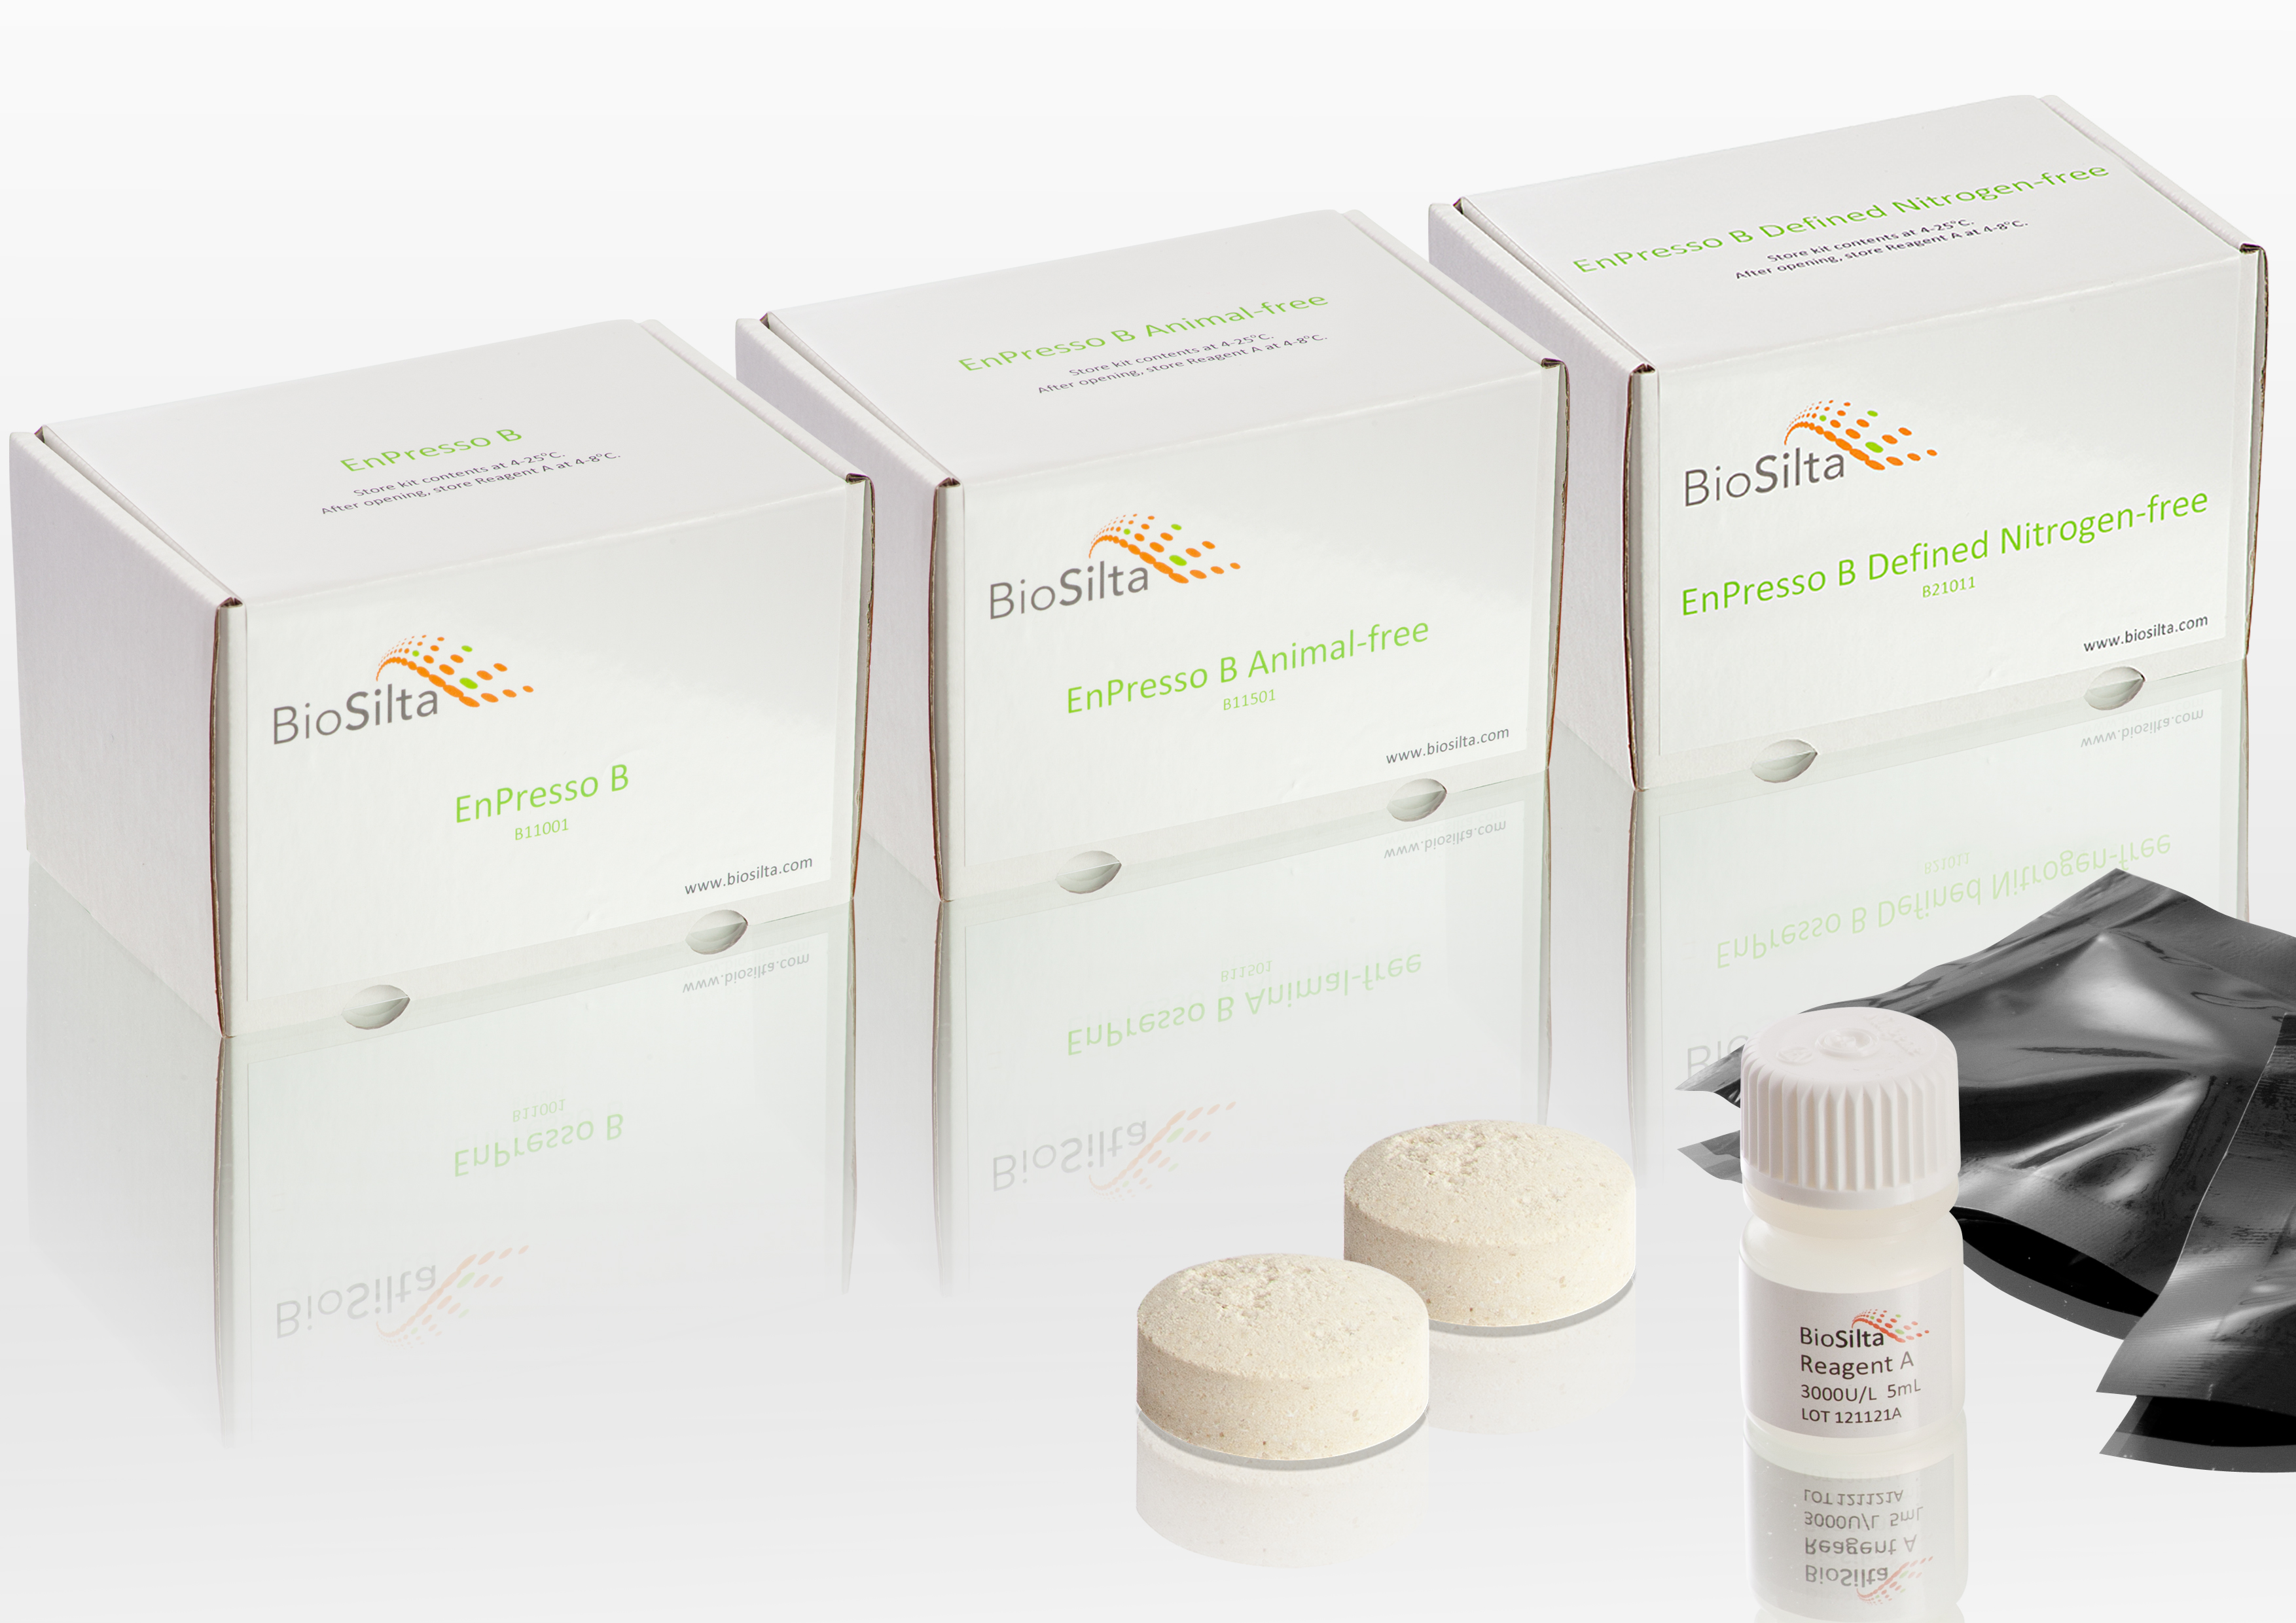 BioSilta Introduces EnPresso B Growth Systems for Bacterial Cultures